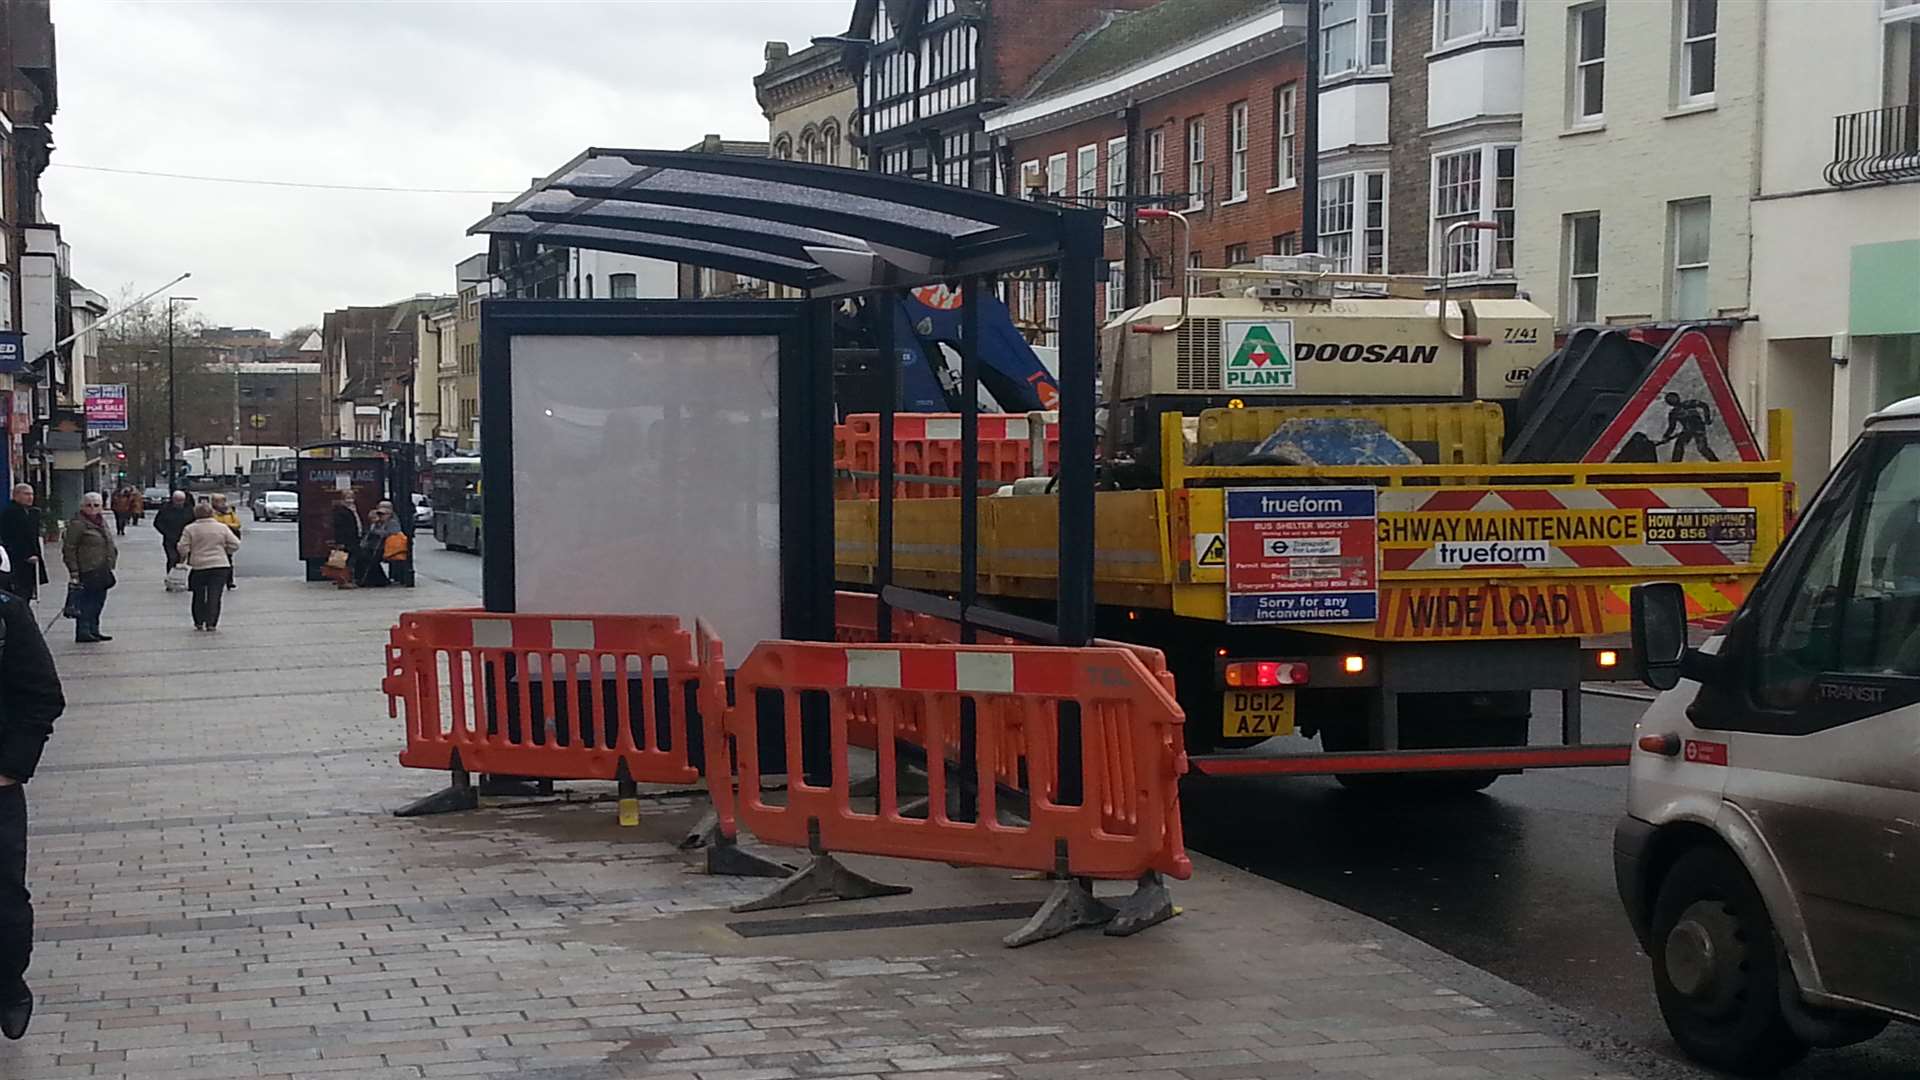 The new bus shelter in Maidstone High Street